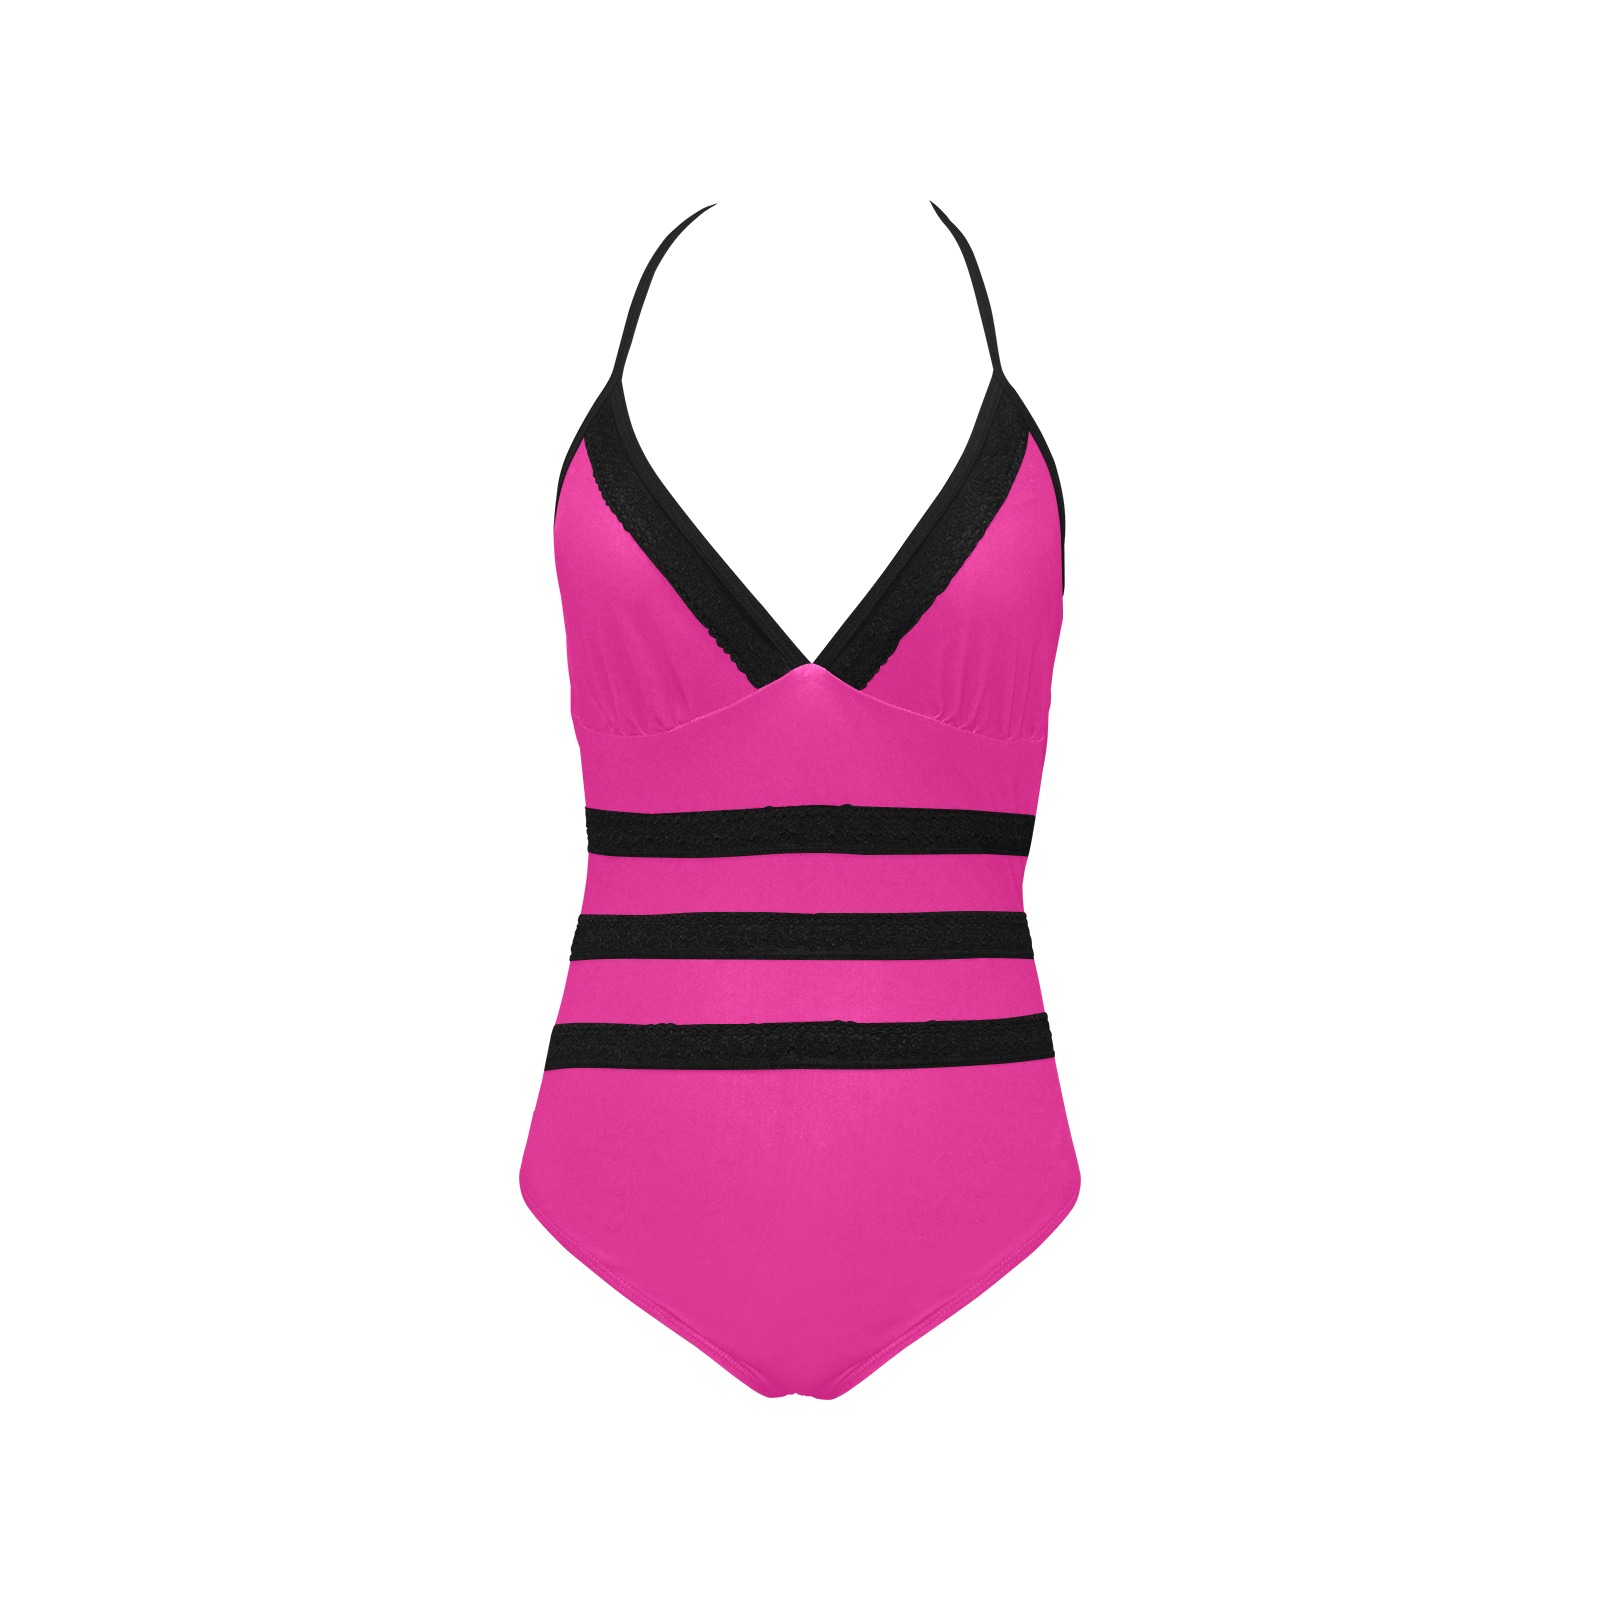 color Barbie pink Lace Band Embossing Swimsuit (Model S15)